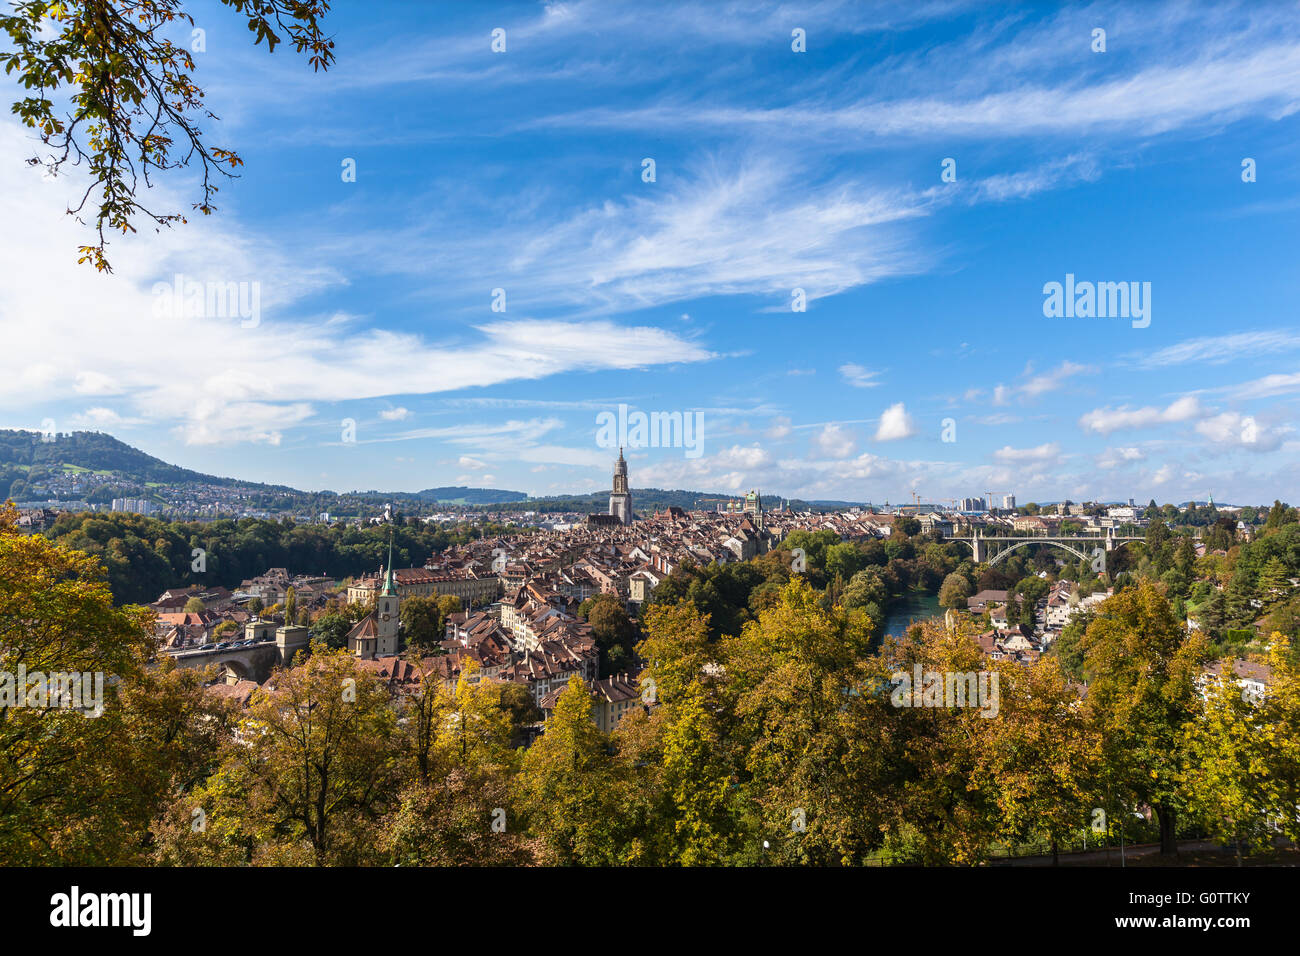 Panorama view of Berne old town from mountain top in rose garden, capital city of Switzerland. Stock Photo